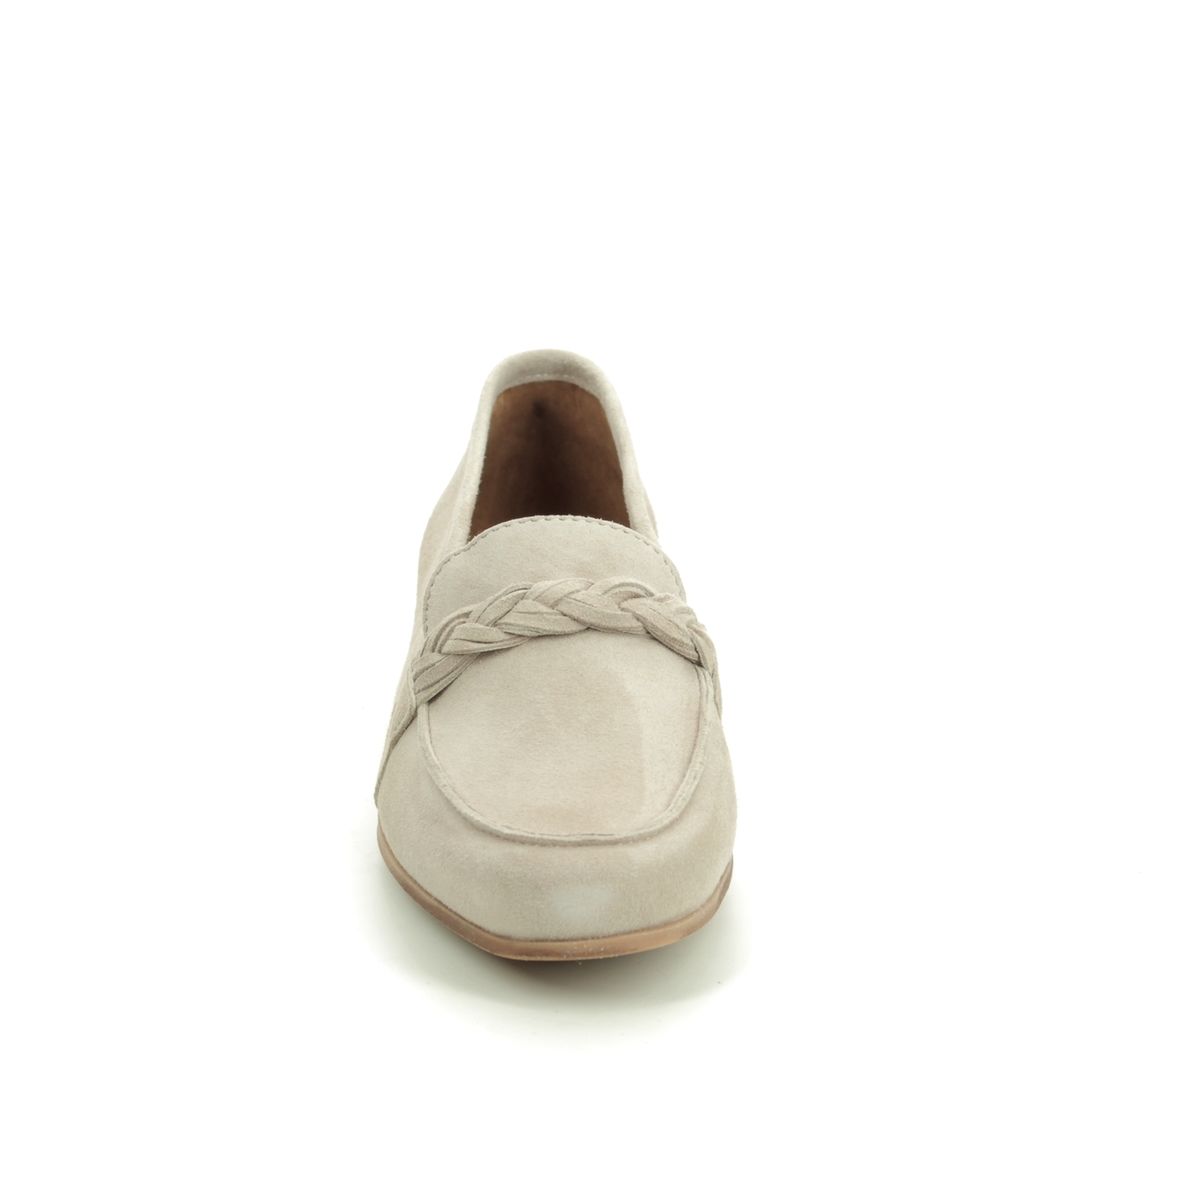 Tamaris Edany 24228-24-341 Taupe suede loafers